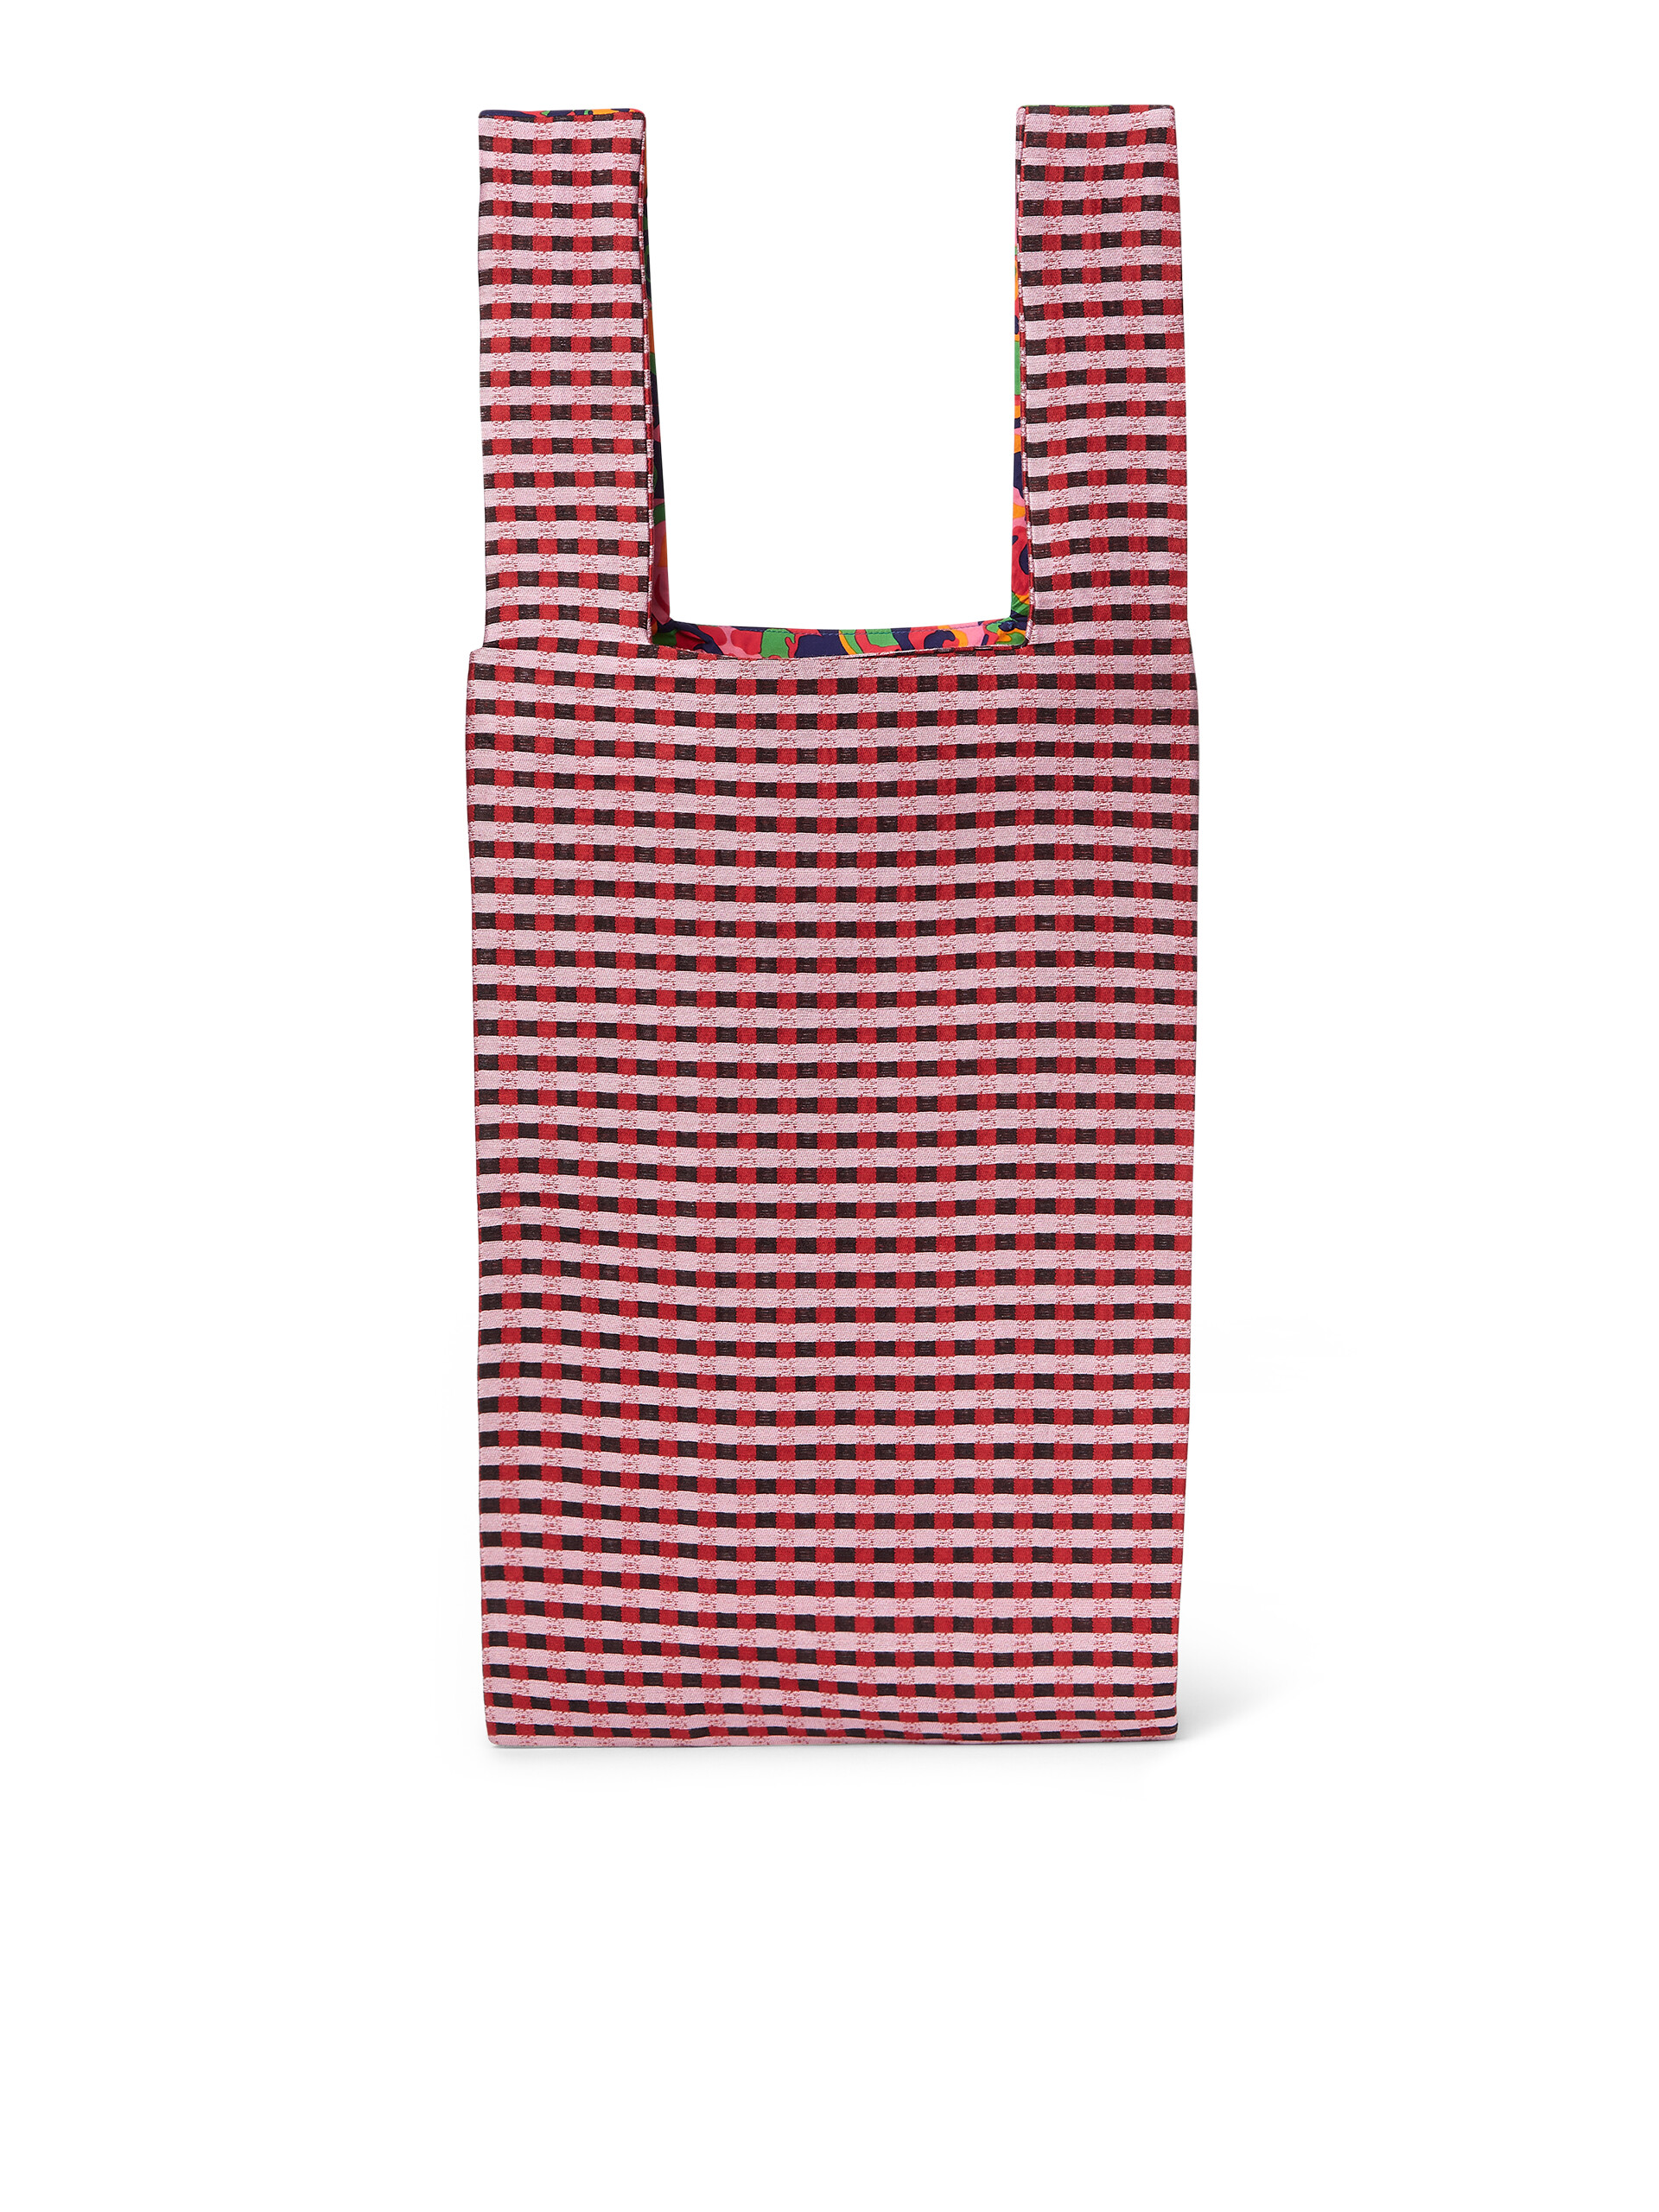 MARNI MARKET TOTE cotton shopping bag with floral and check print - Shopping Bags - Image 3